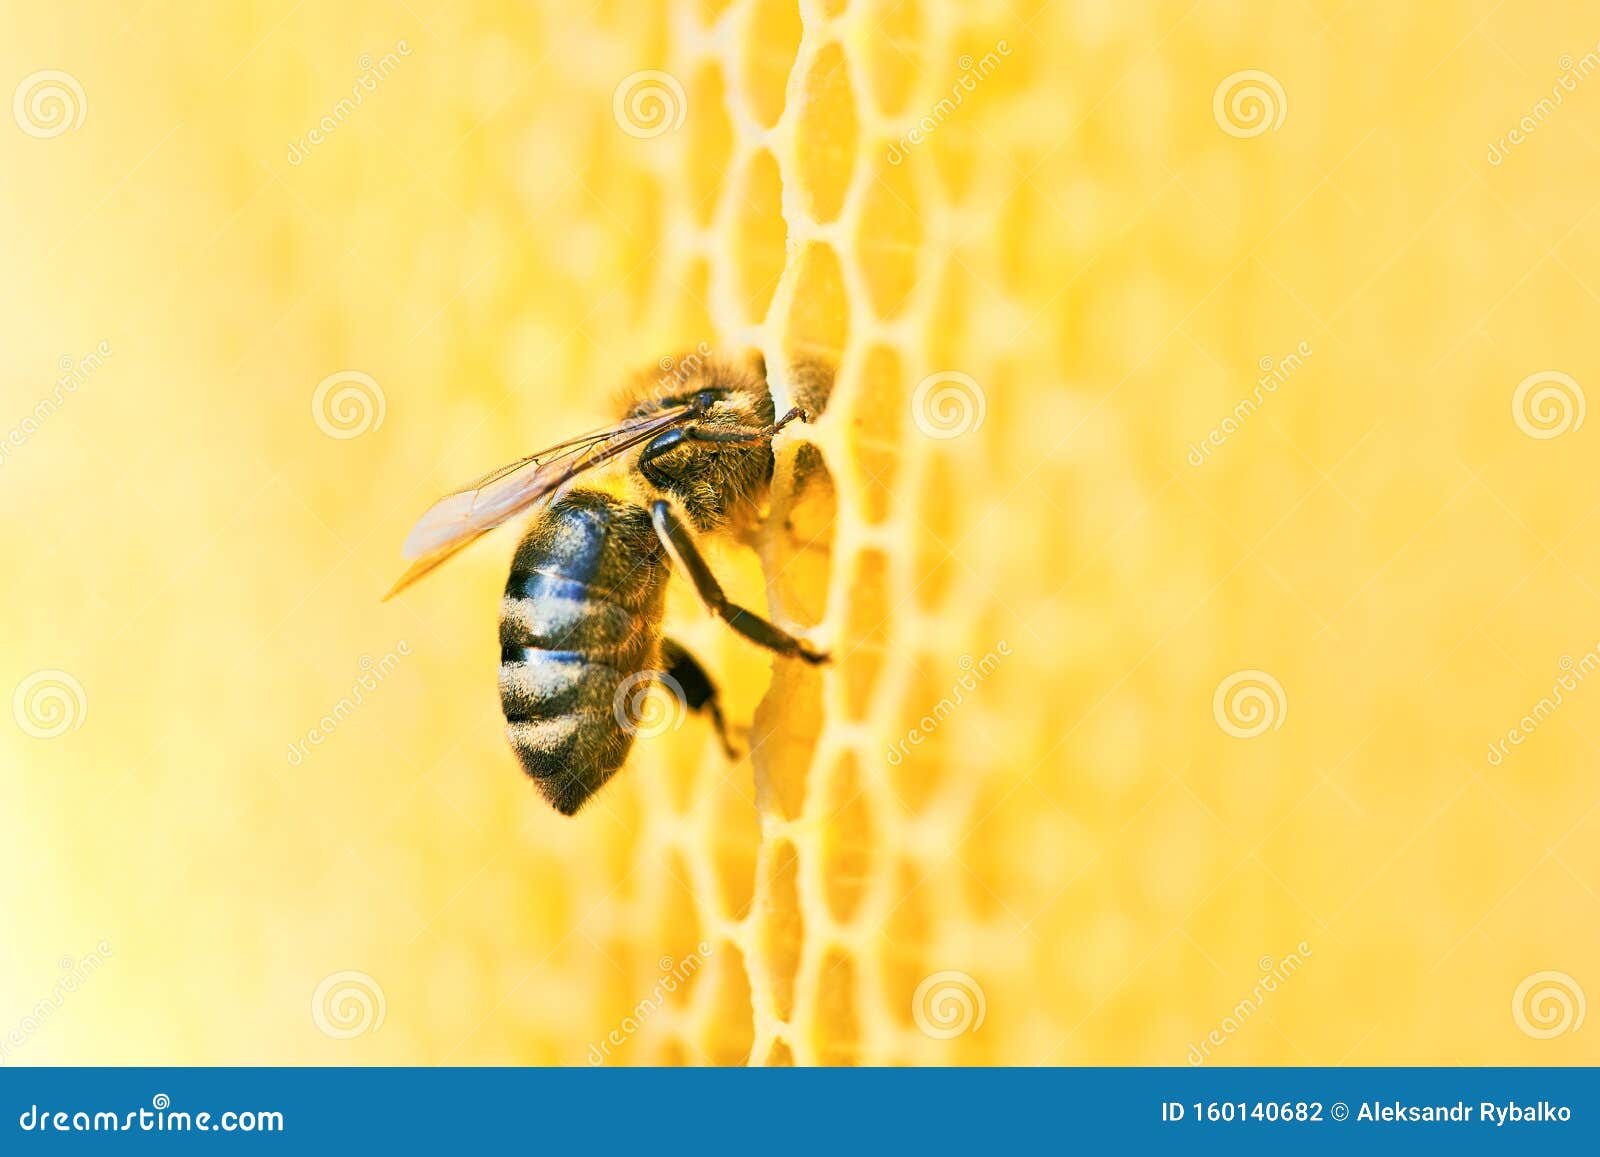 macro photo of a bee hive on a honeycomb with copyspace. bees produce fresh, healthy, honey.